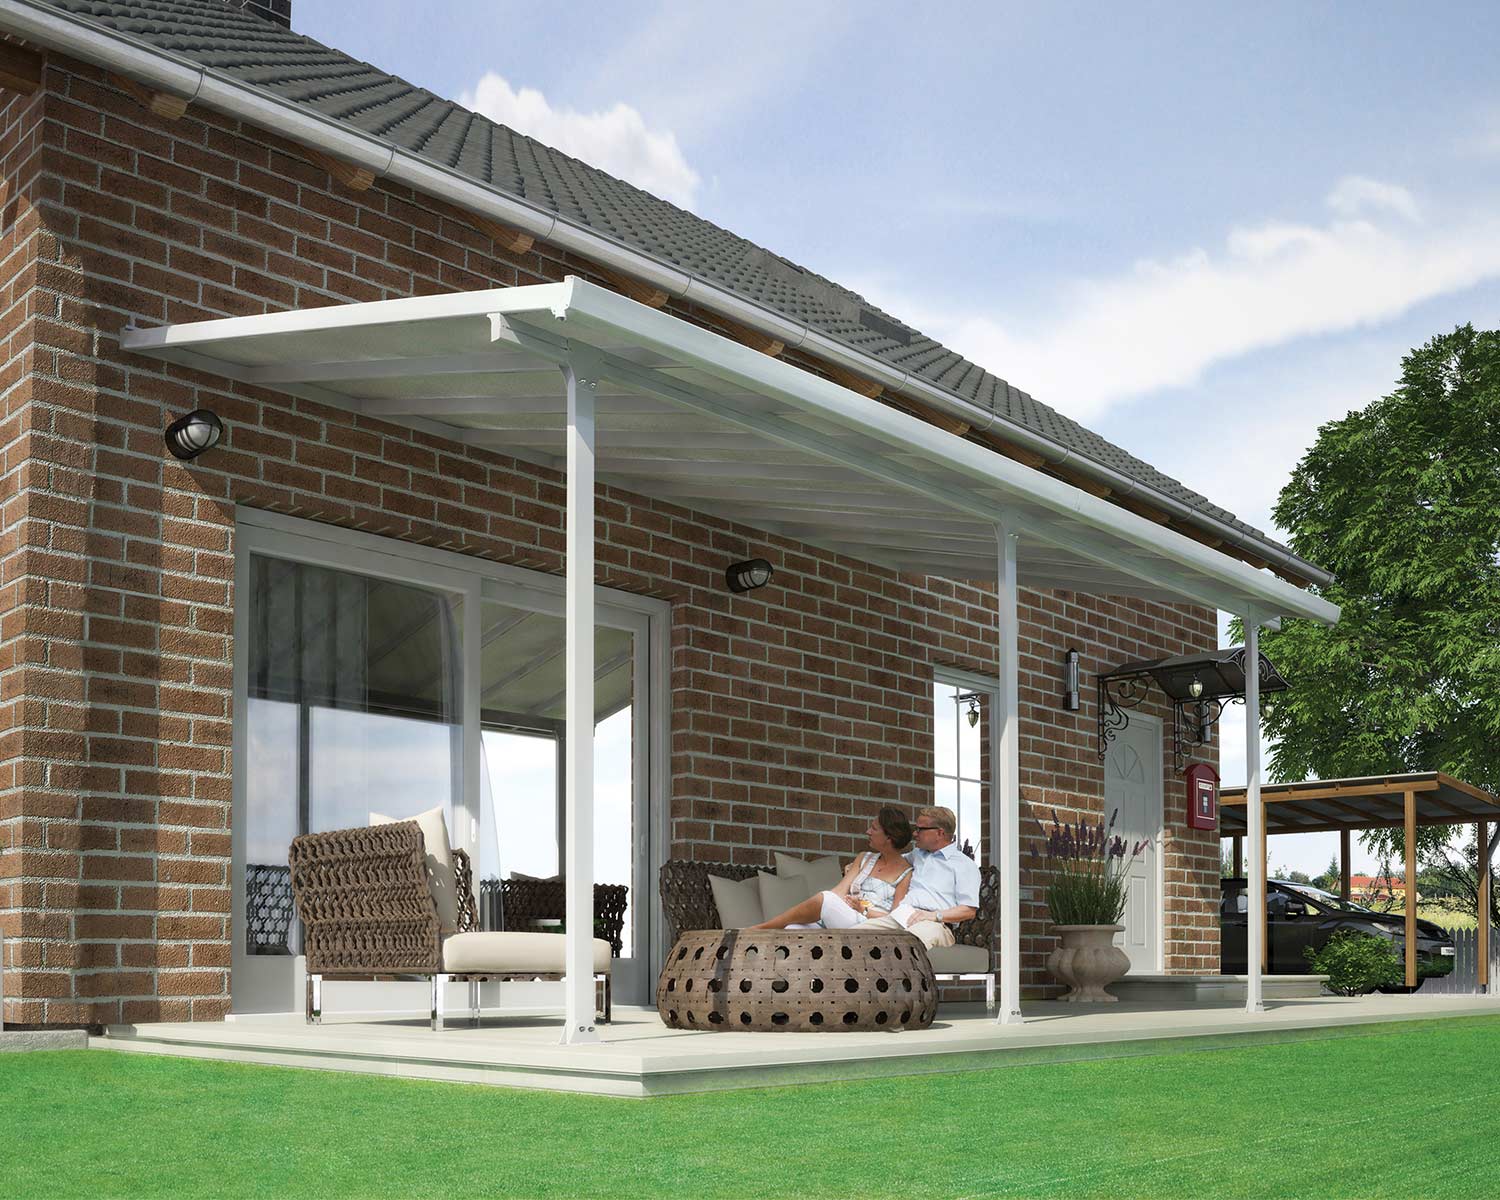 Aluminium White Patio Cover 10 ft. x 18 ft. with polycarbonate roof panels, attached to the house to protect patio furniture